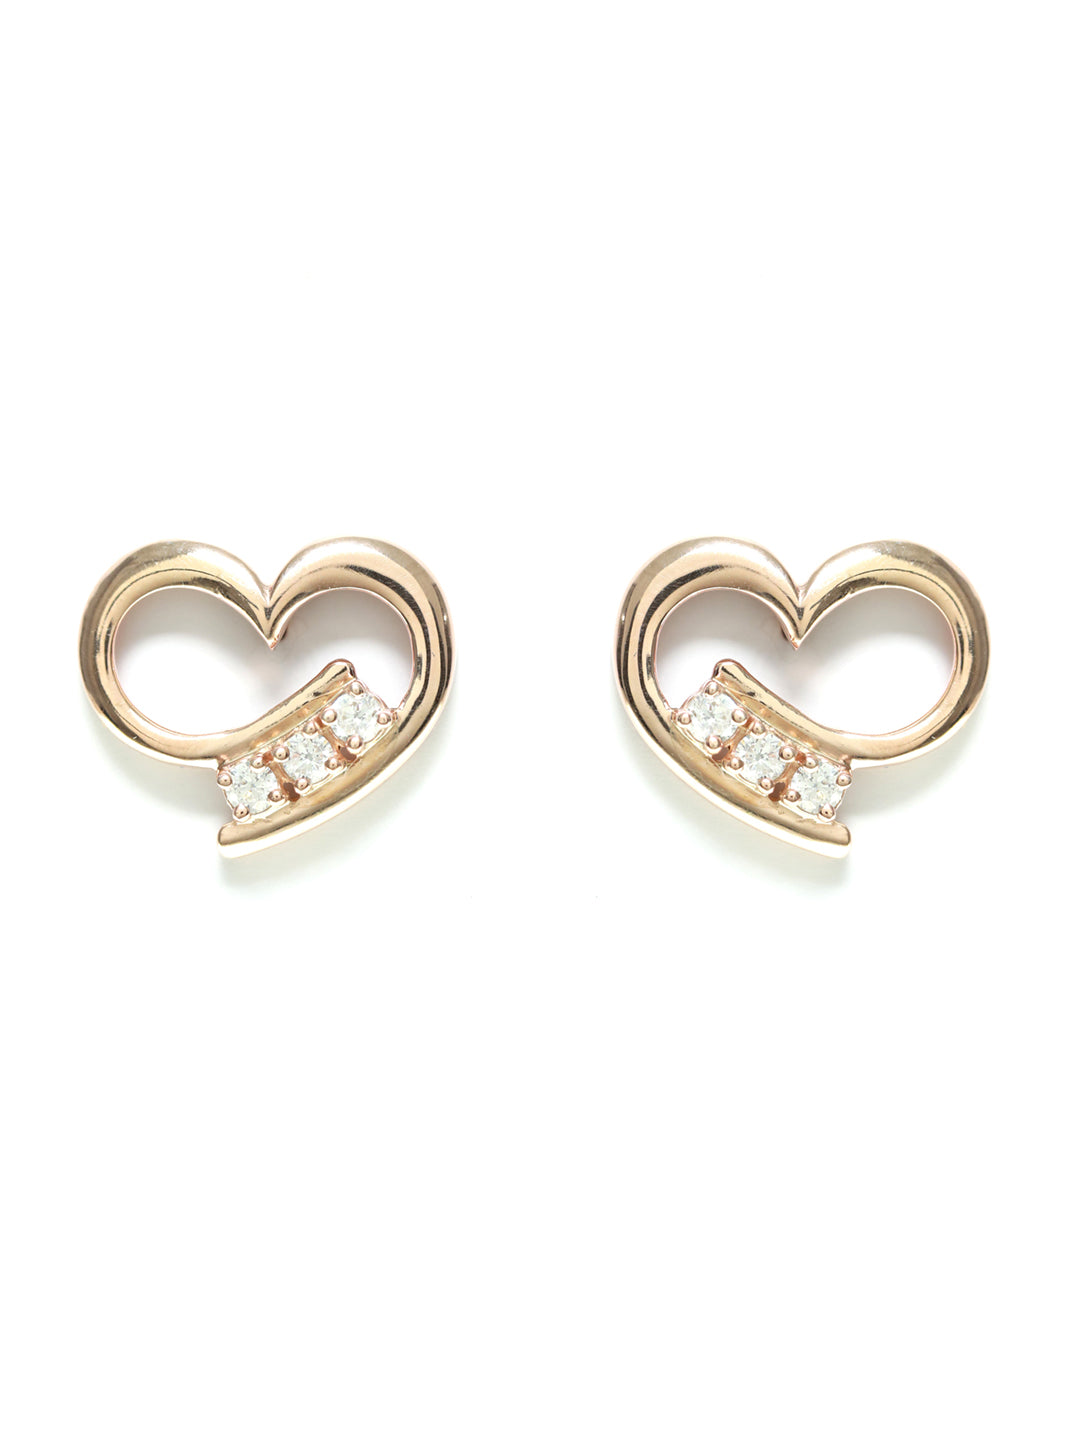 Rose Gold Curled Heart Sterling Silver Studs